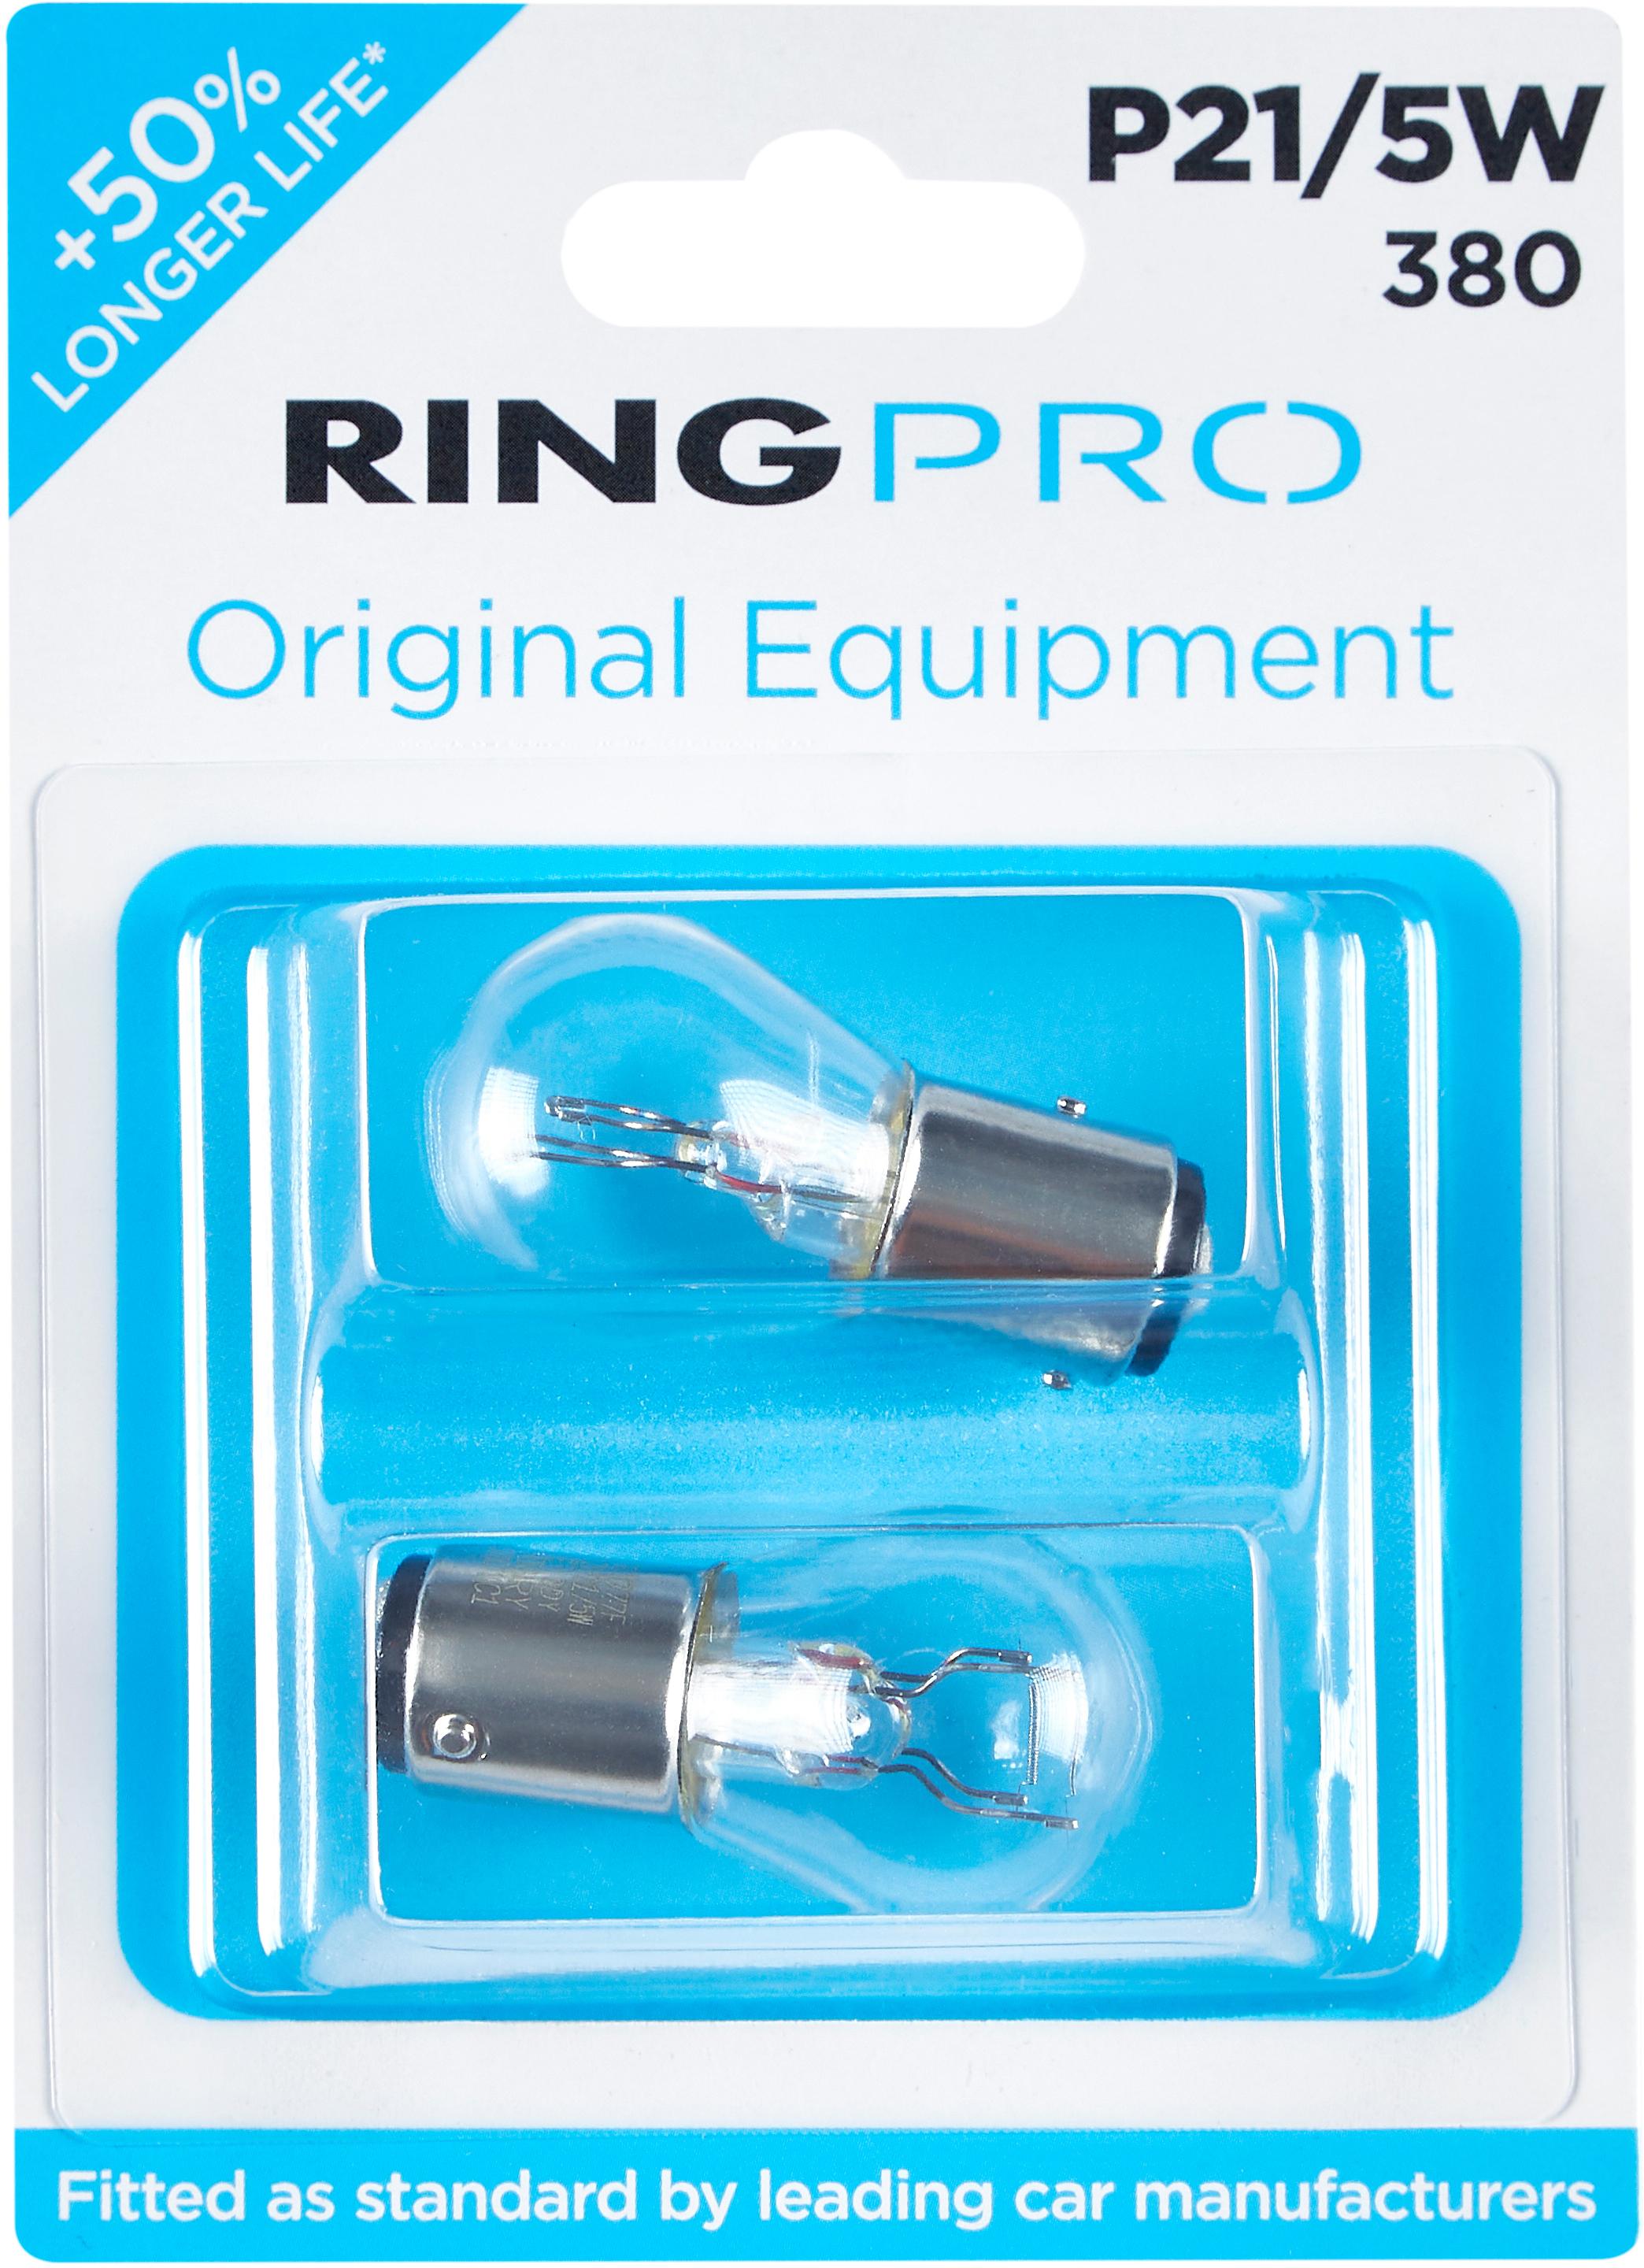 Ring Pro 380 P21/5W Car Bulb Twin Pack